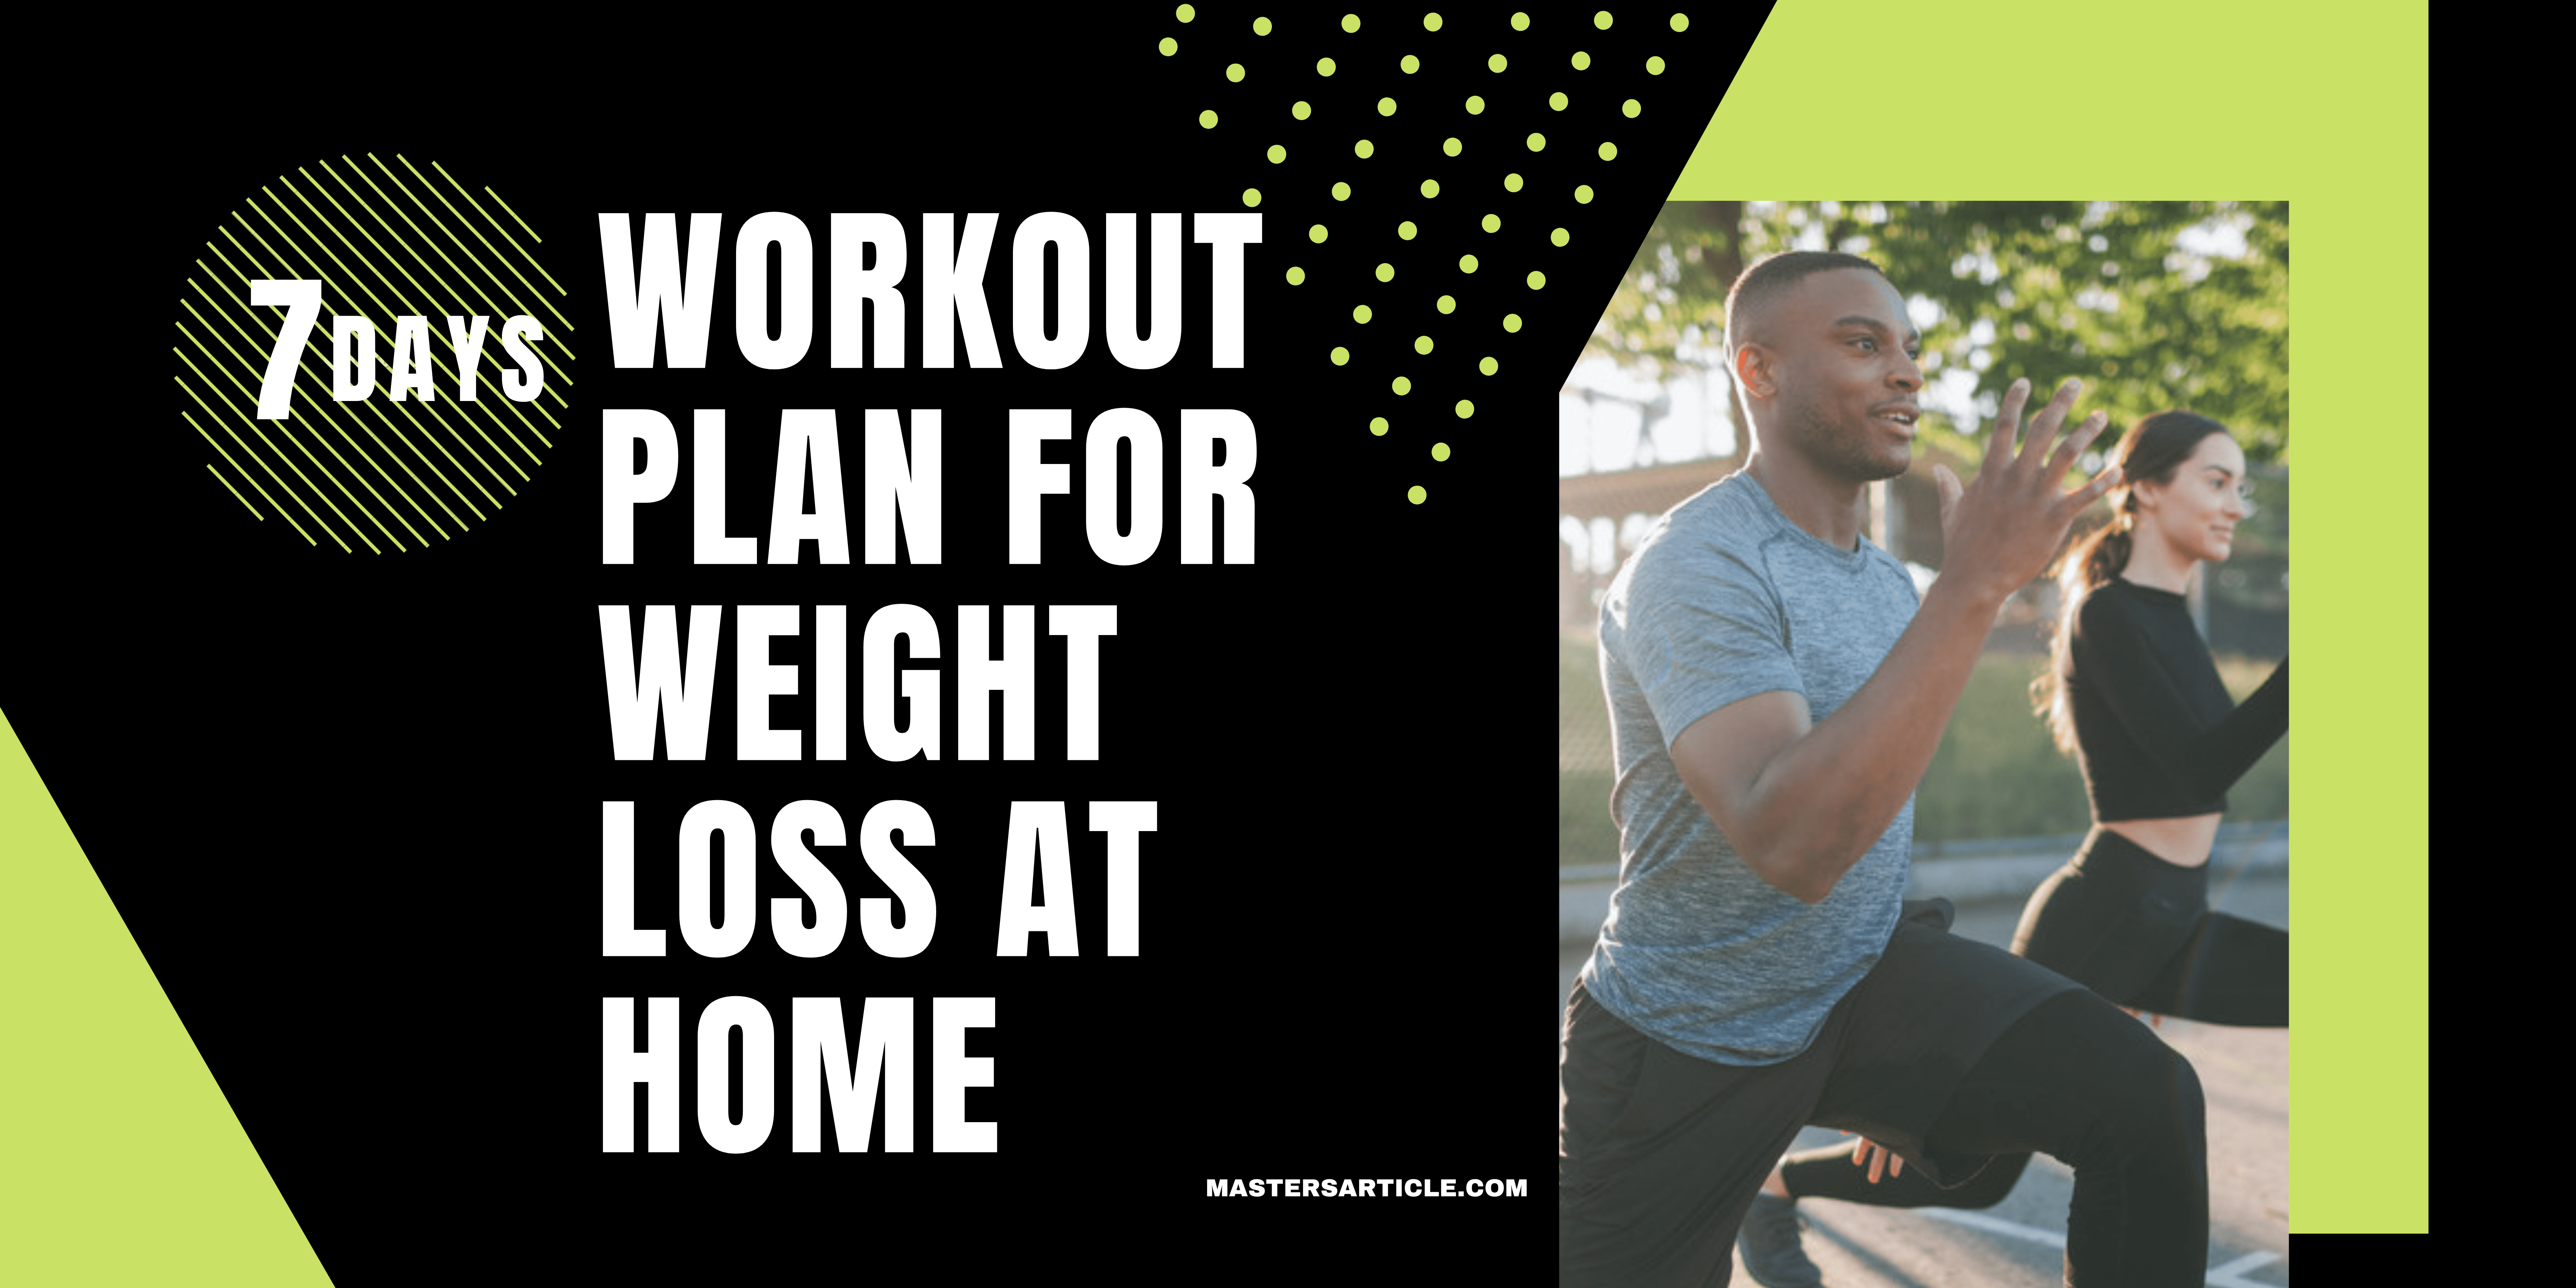 7 Day Workout Plan For Weight Loss At Home | Two a Day Workout Plan For Weight Loss | 100% Helpful